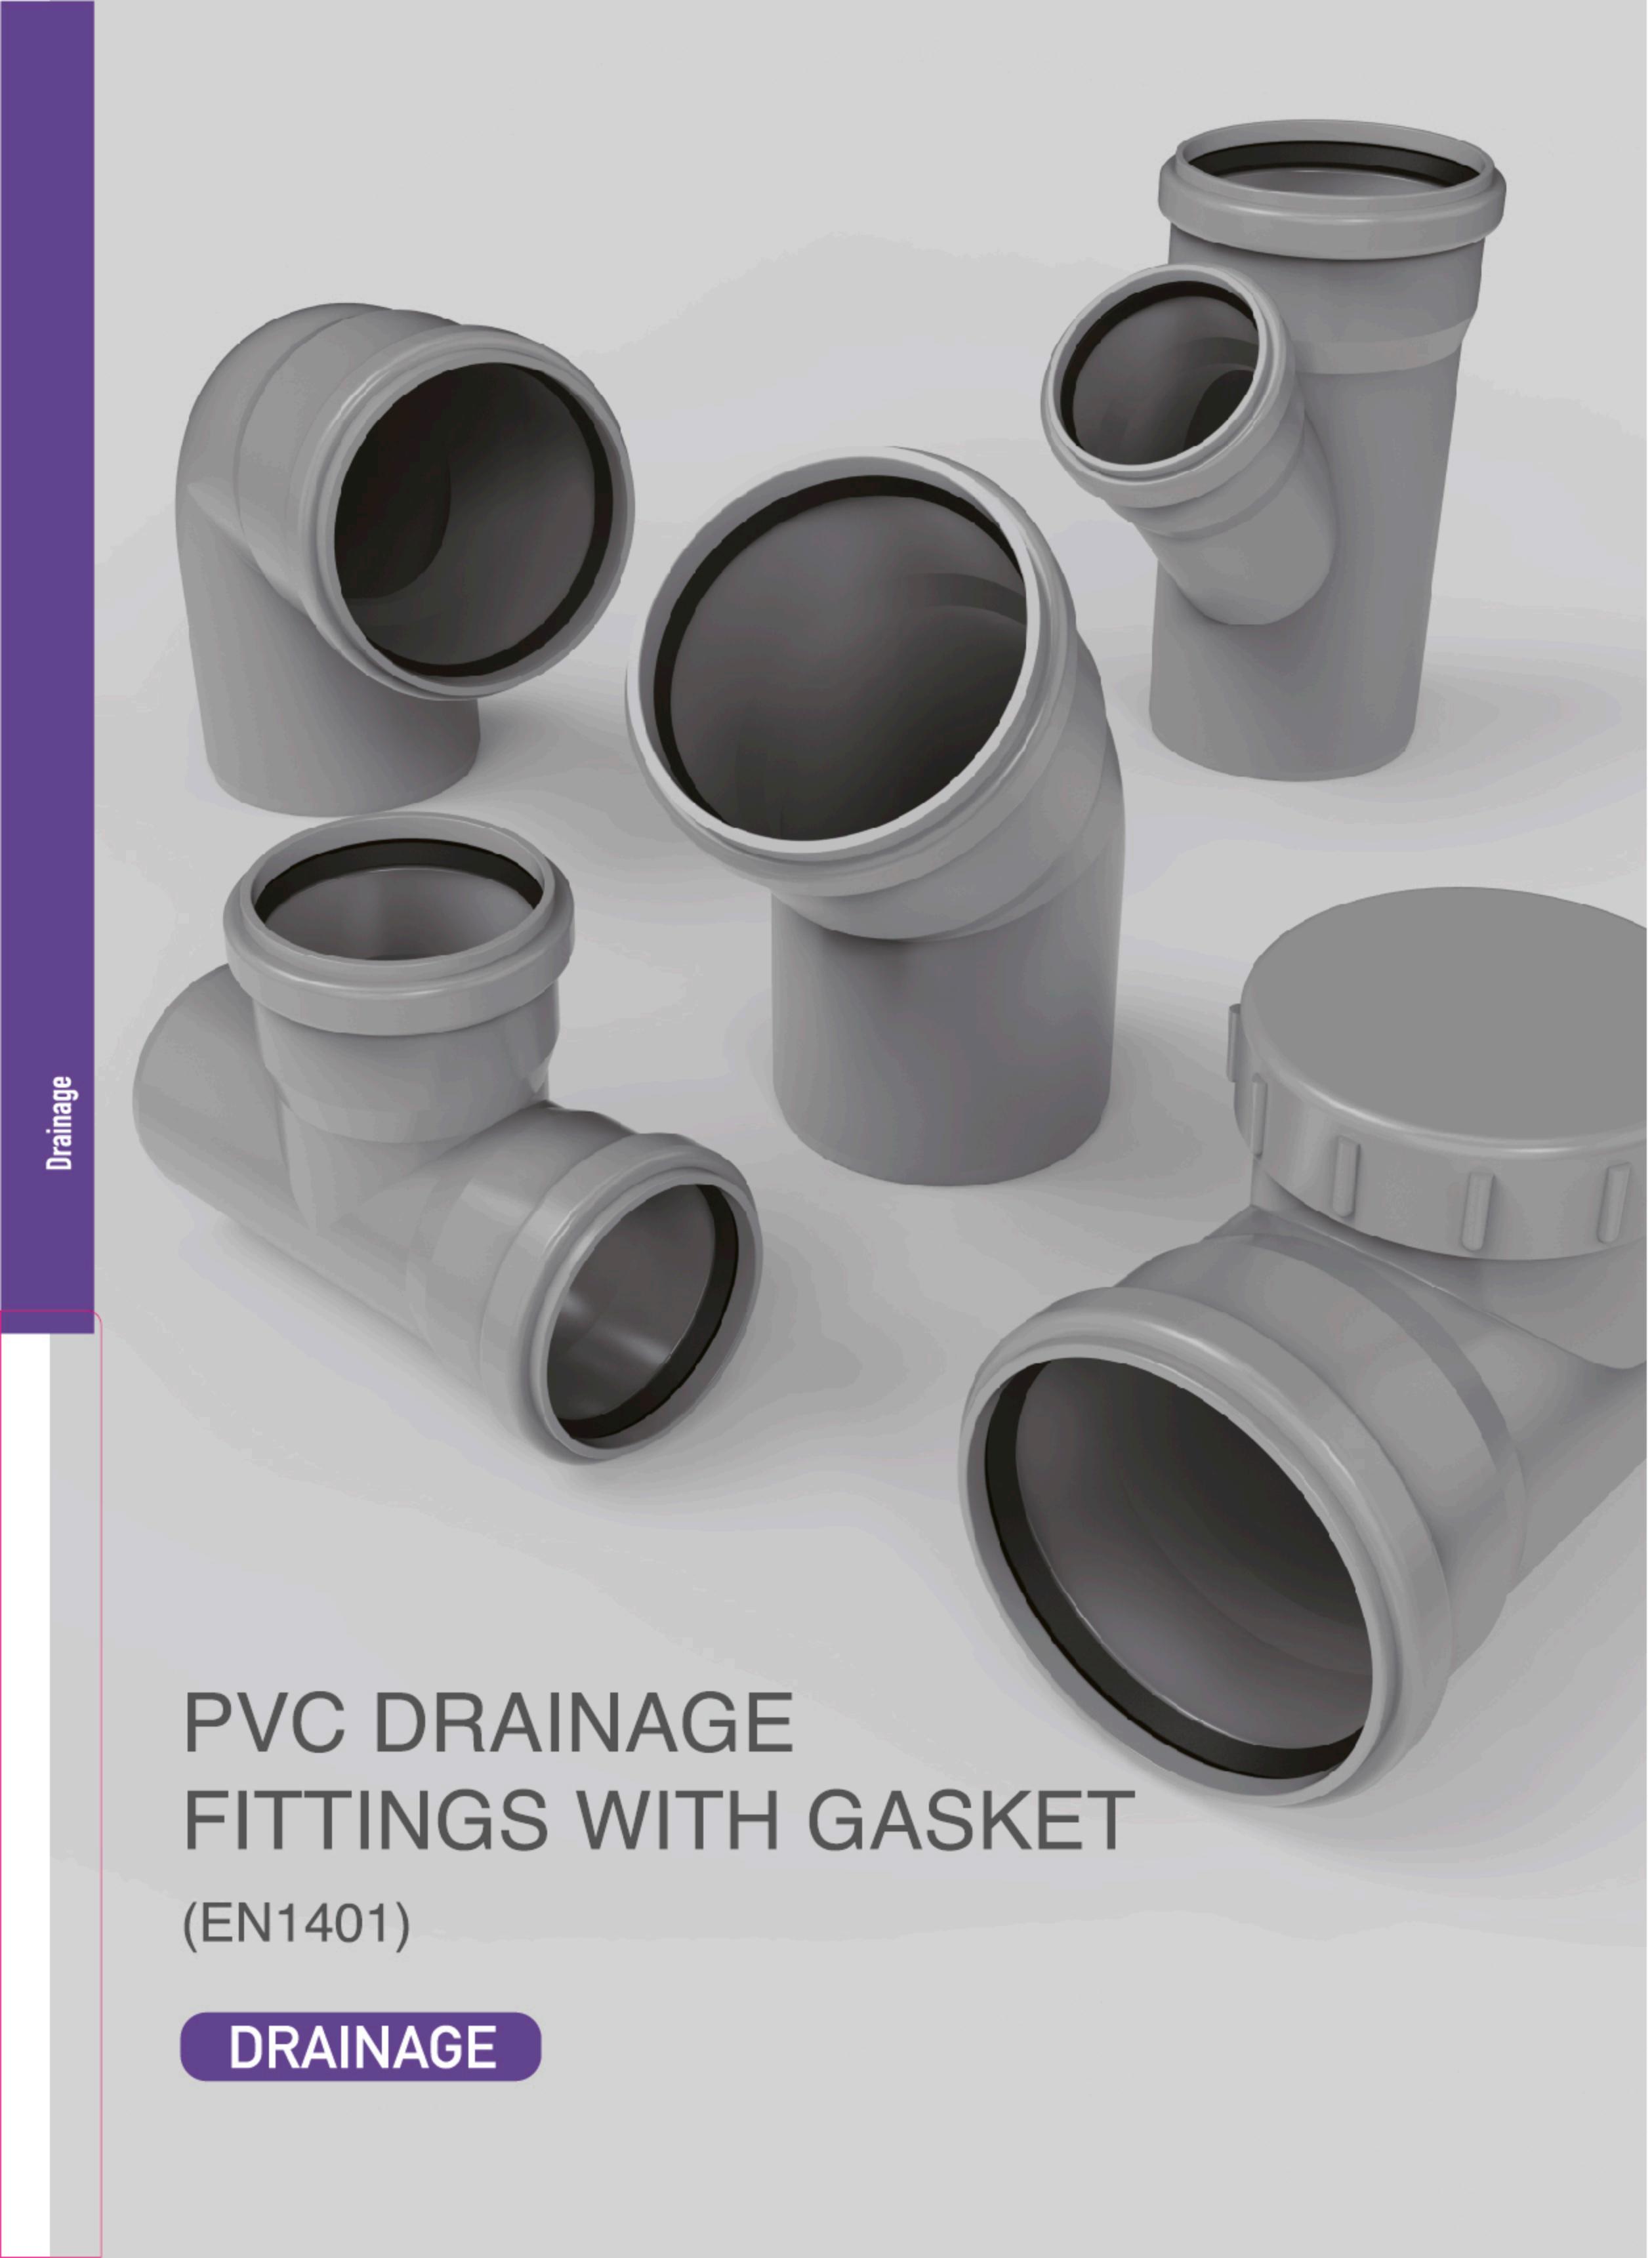 PVC DRAINAGE FITTINGS WITH GASKET 1